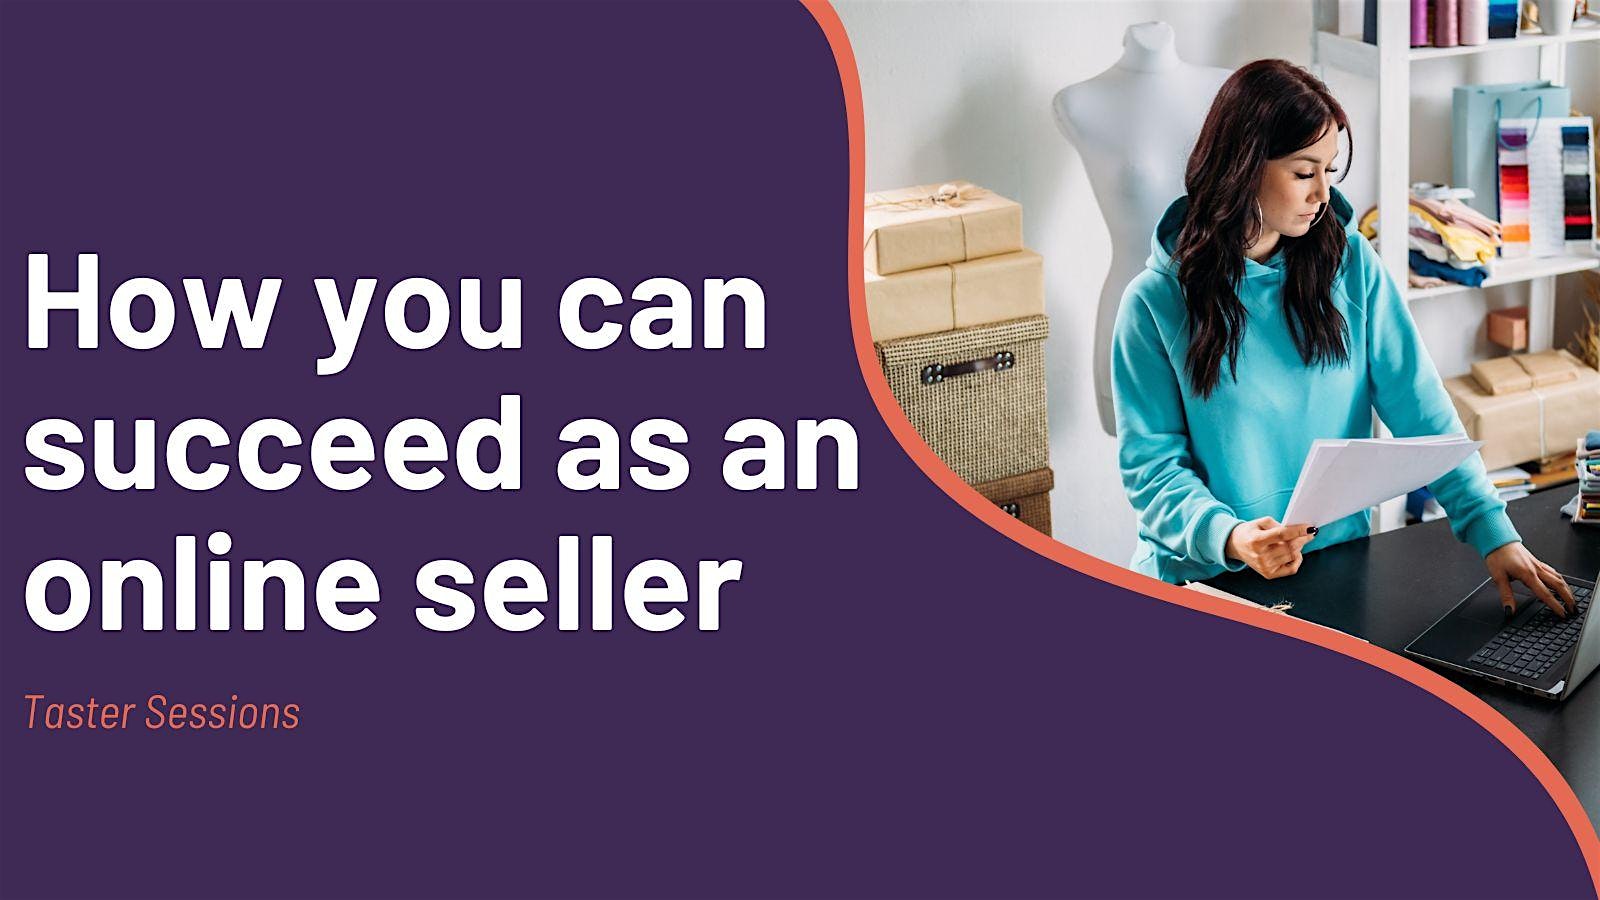 Taster Sessions: How you can succeed as an online seller (Dumfries) image